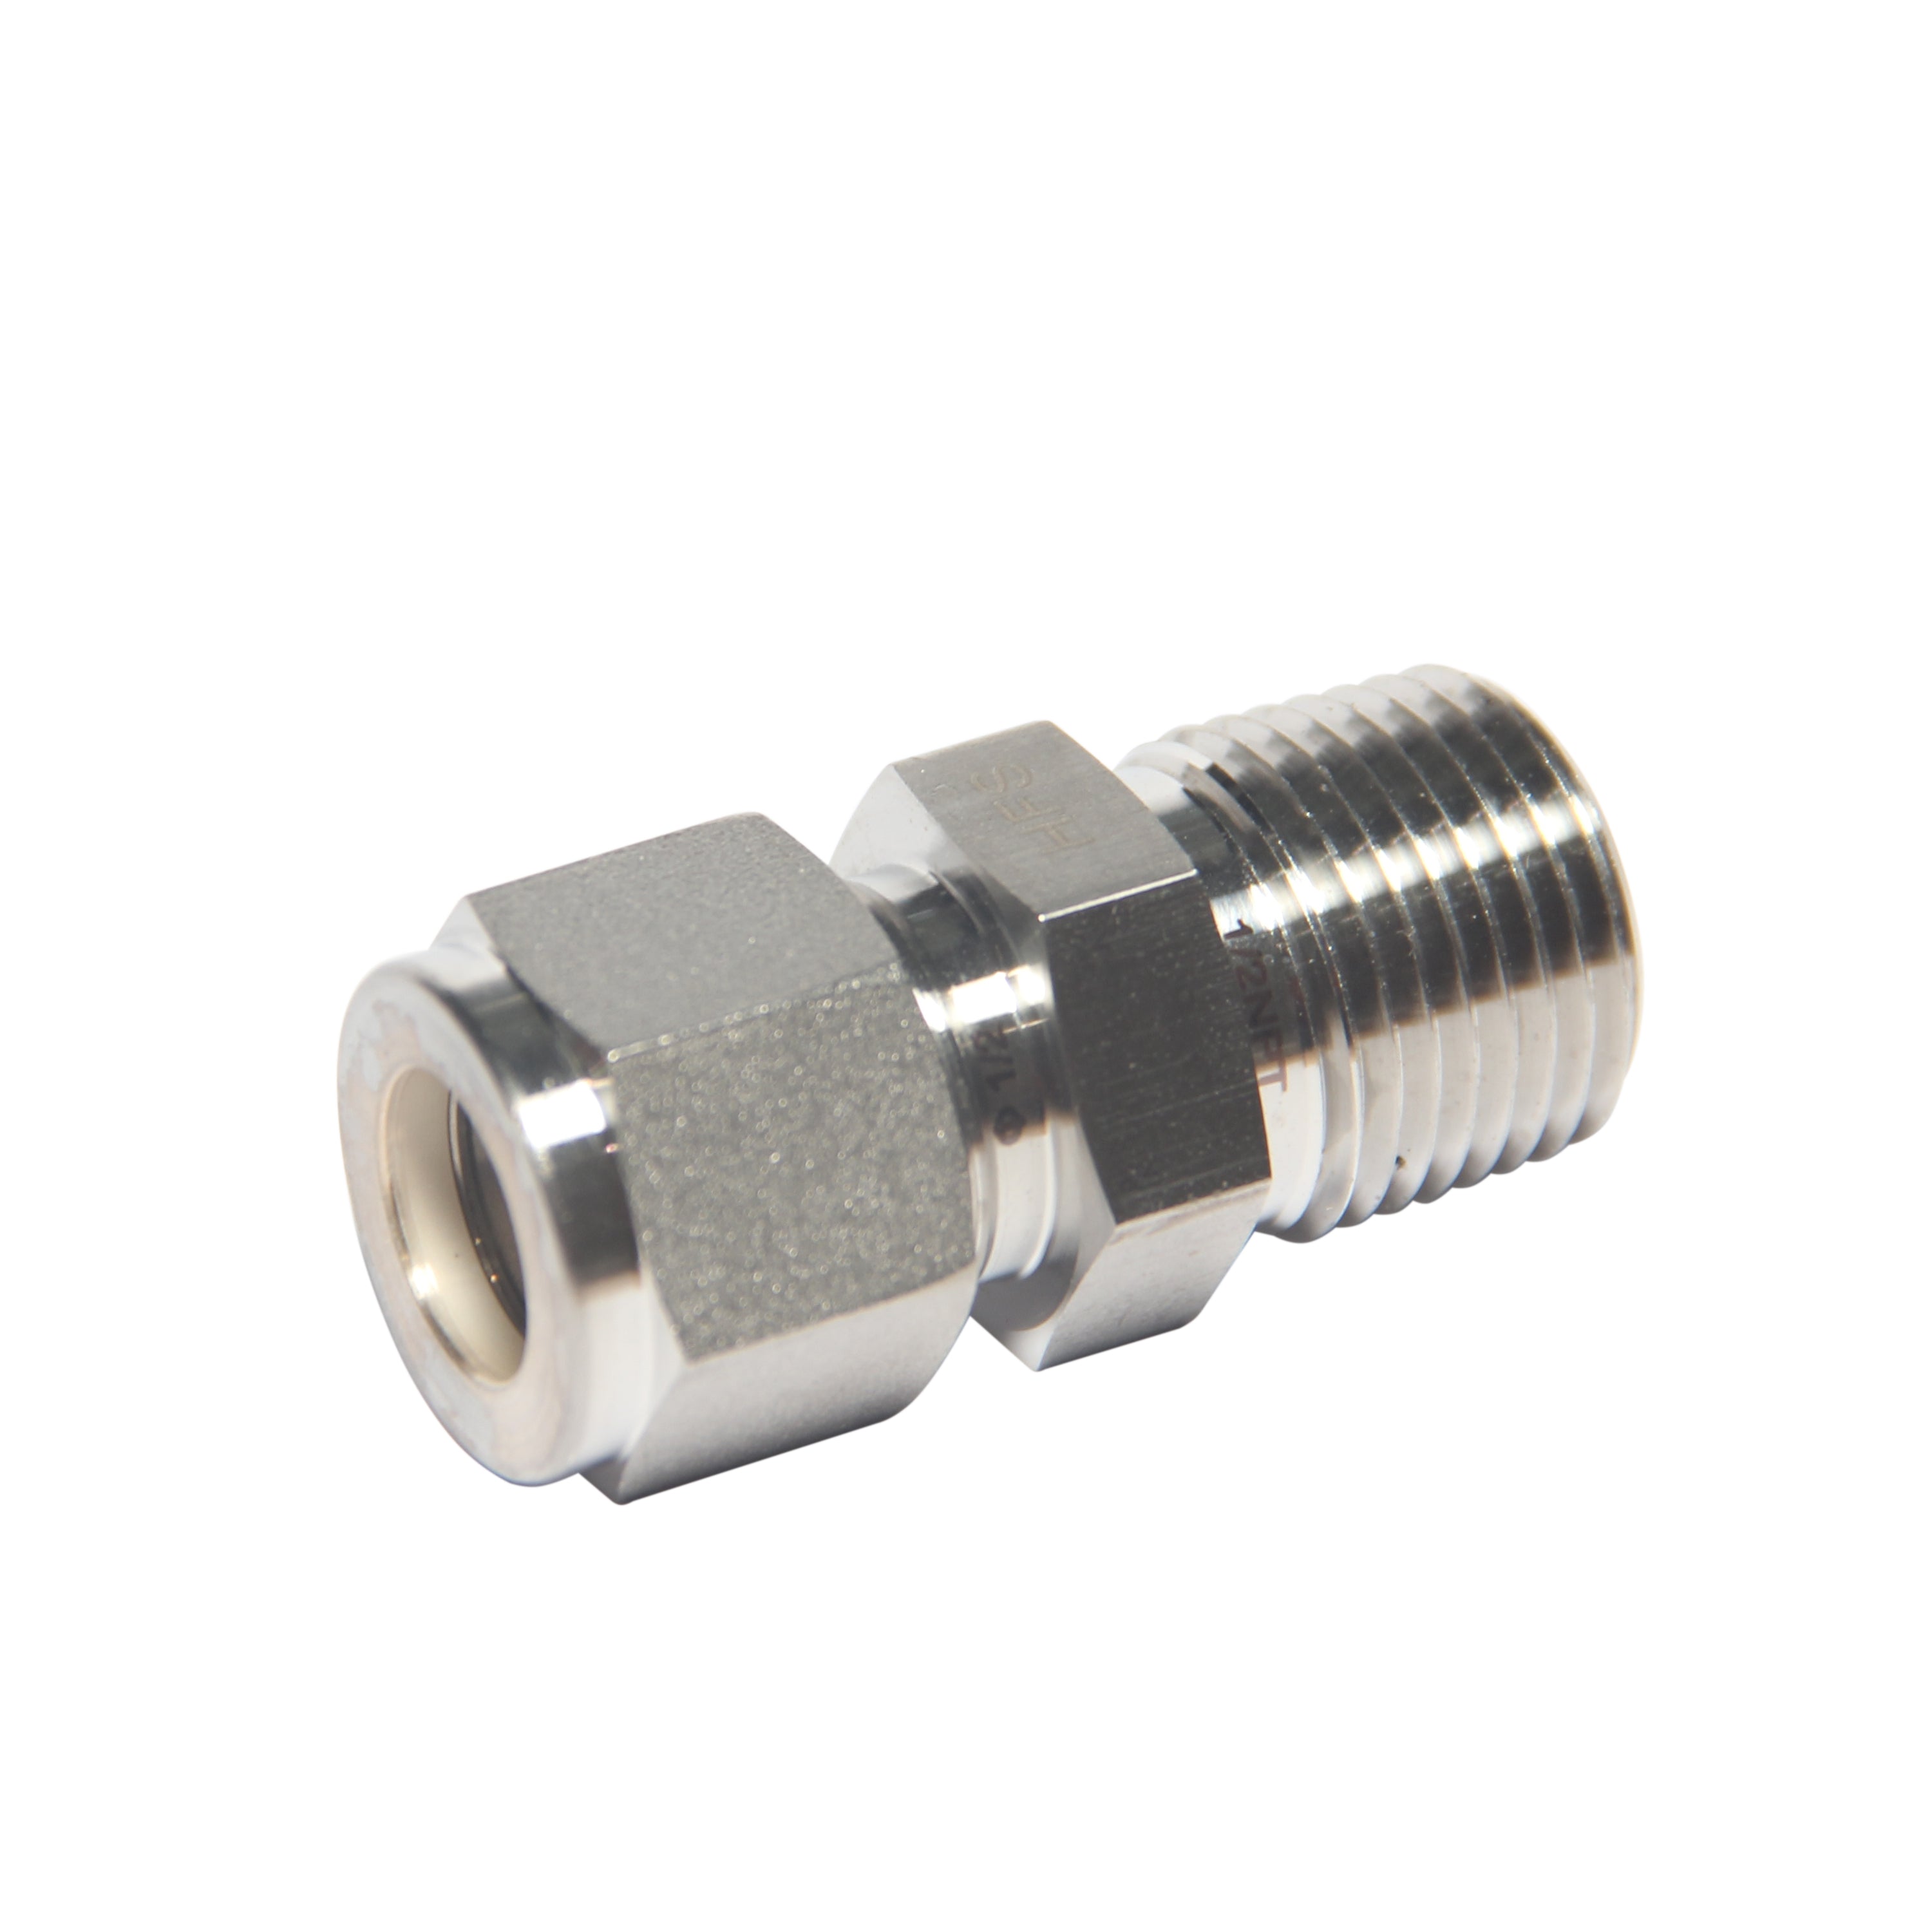 Compression Tube Fitting 1/2 Tube OD x 1/2 NPT Male Connector